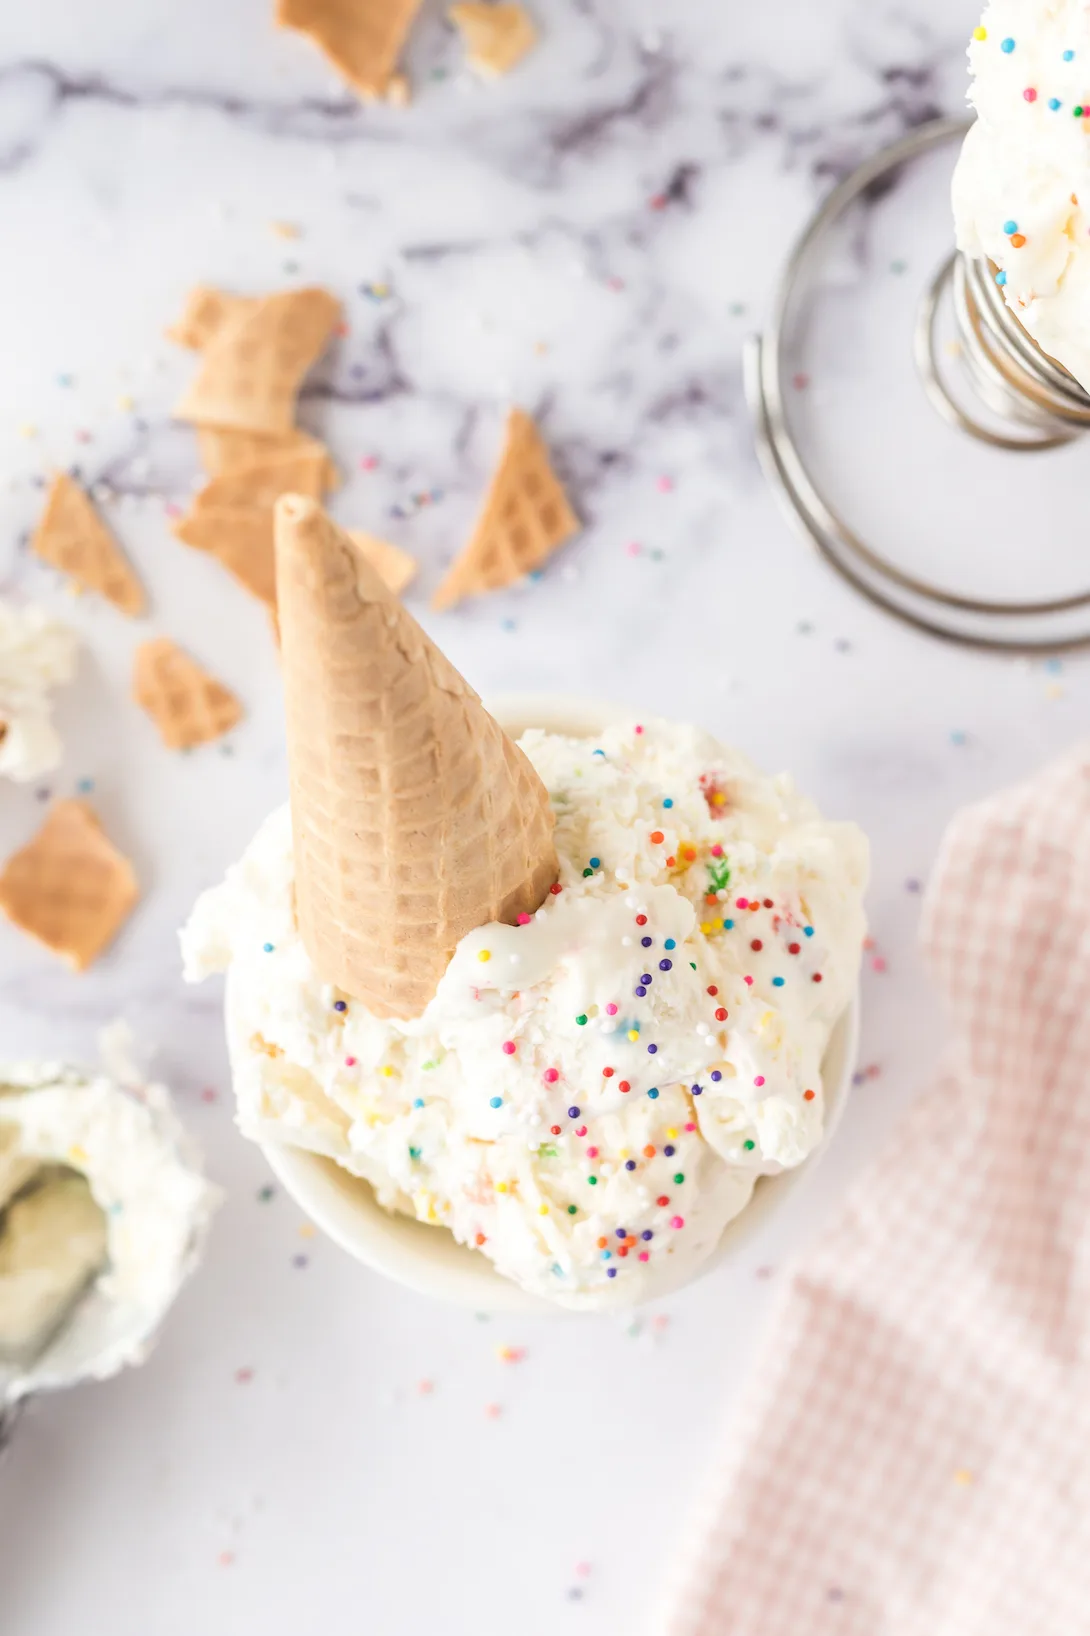 angled down funfetti ice cream sundae with sprinkles on top.